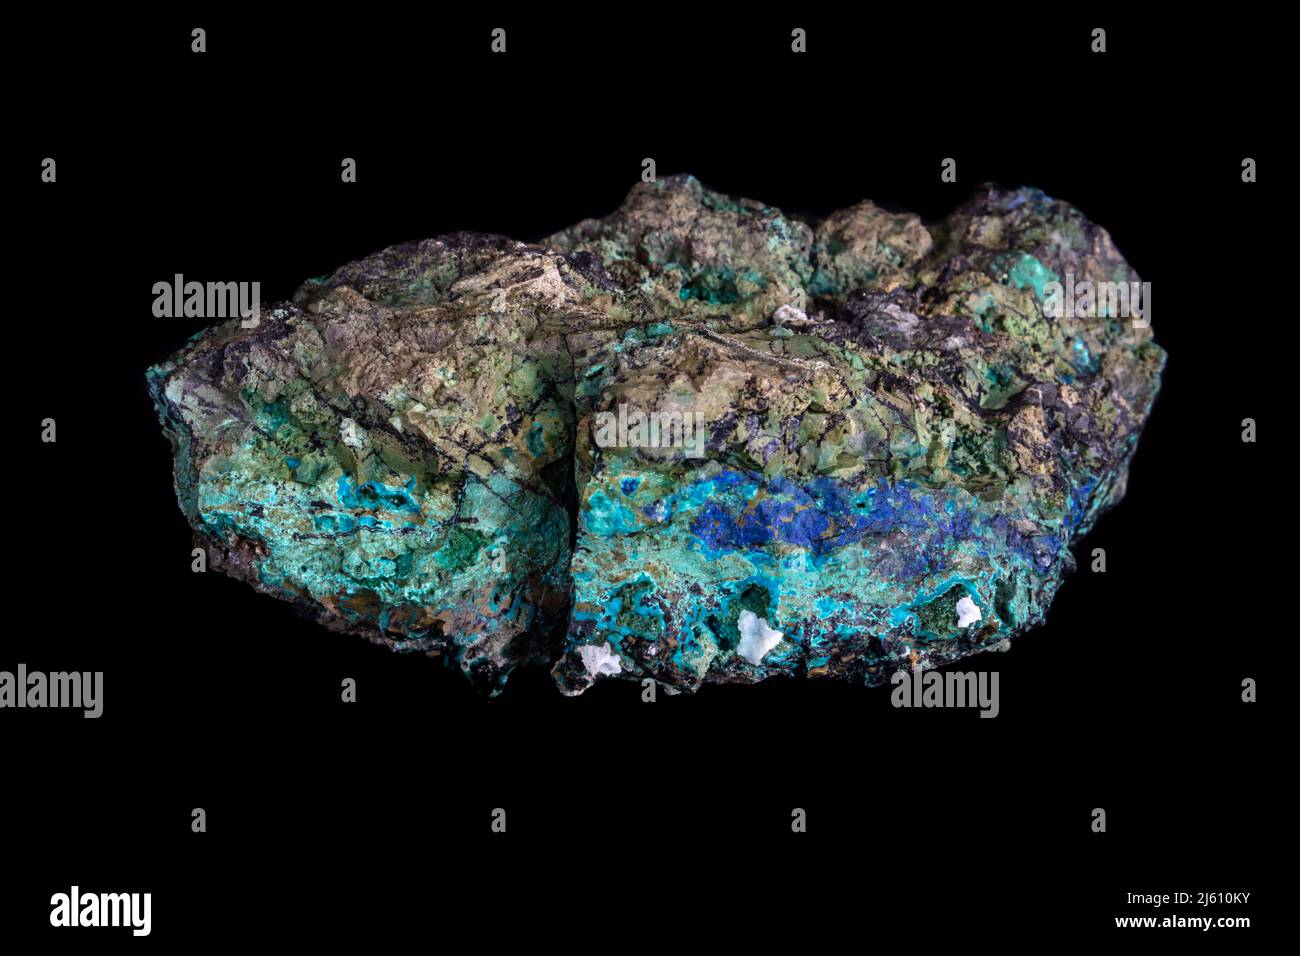 Copper ore from the Mojave Desert, California. Turquoise, blue and green minerals visible in cross section. Sample weight 780 grams (1 lb 11 oz.) Stock Photo